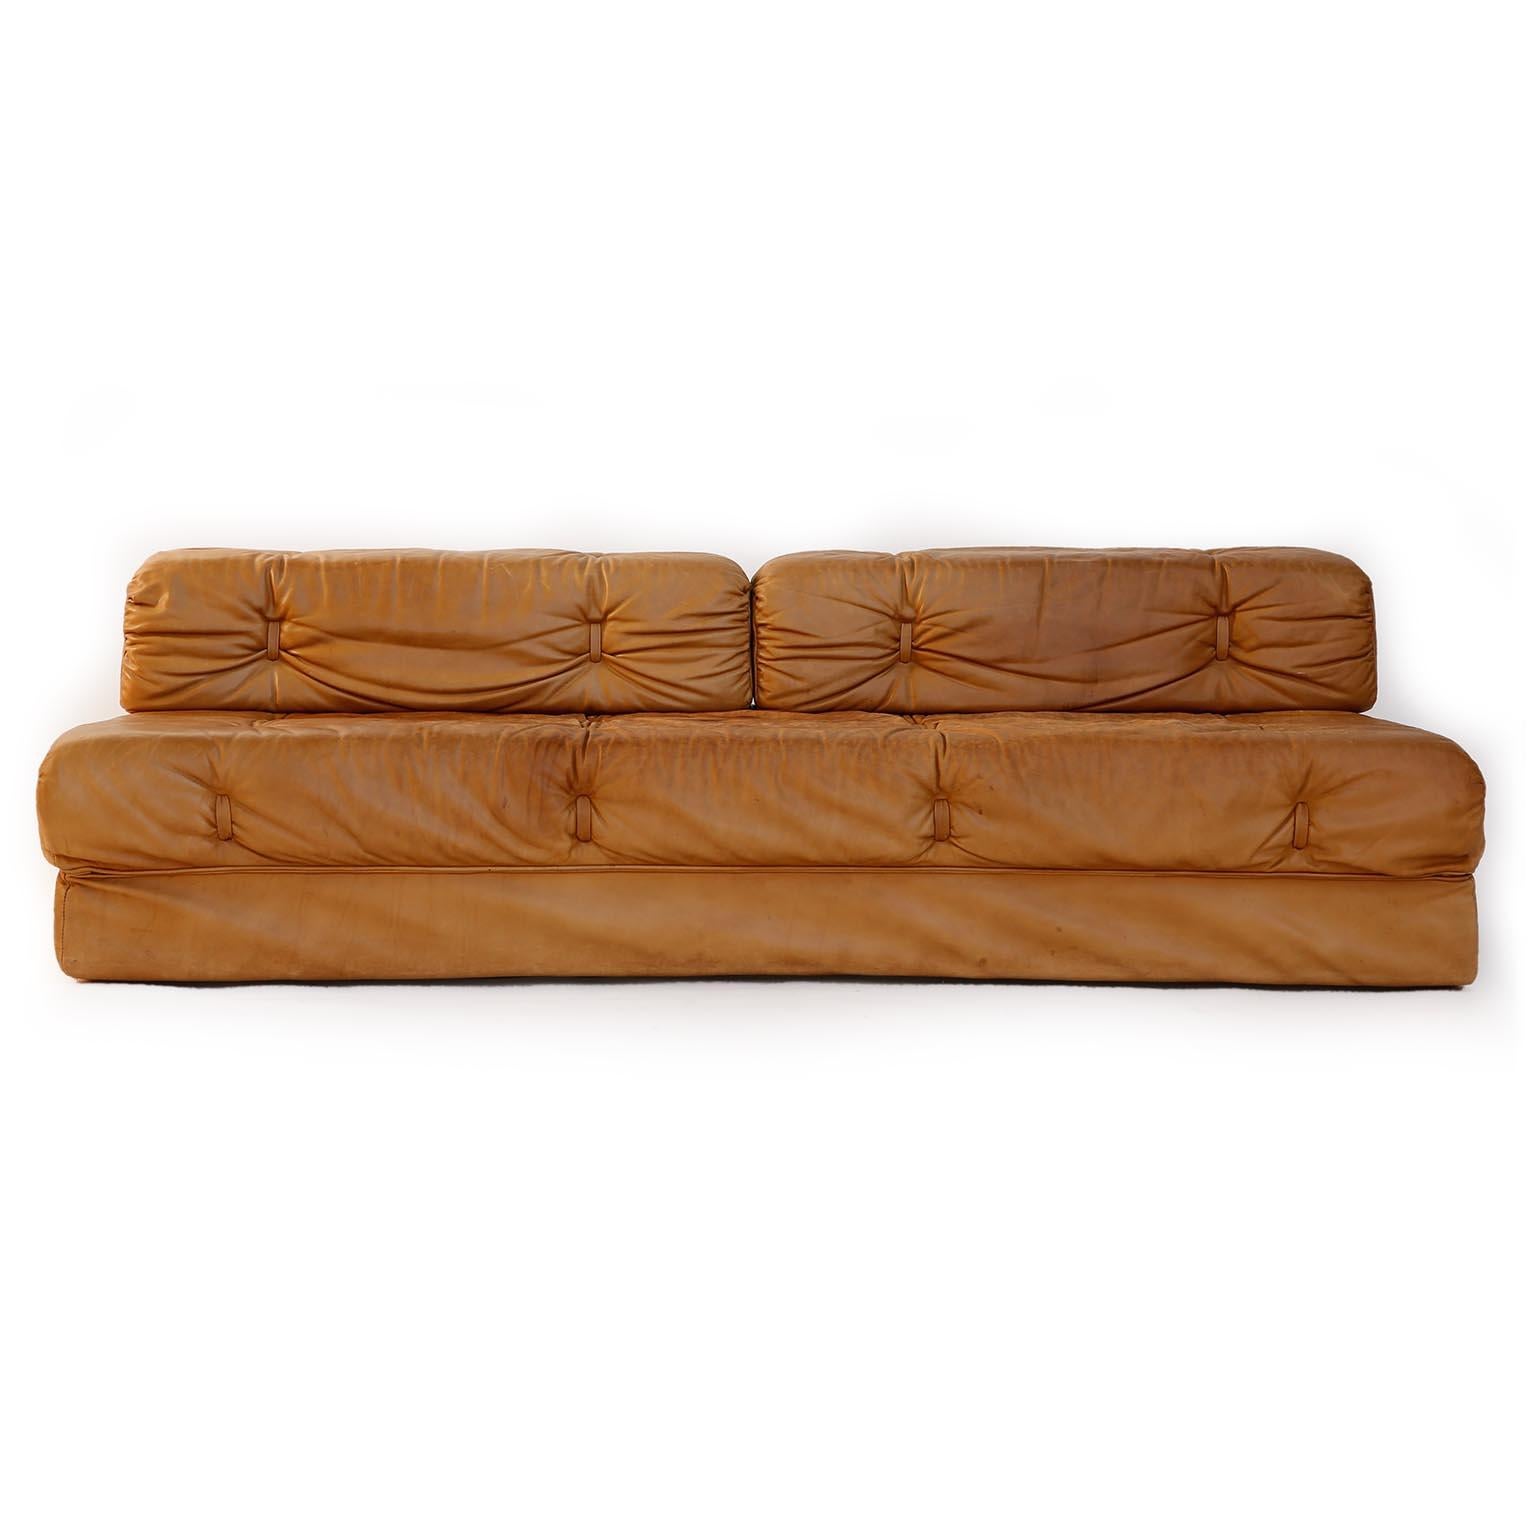 A modular sofa in aged and patinated leather designed by Karl Wittmann and manufactured by Wittmann Möbelwerkstätten, Austria, in midcentury in 1970s.
The set consists of three sectional elements which were made to be used freely and apart from one